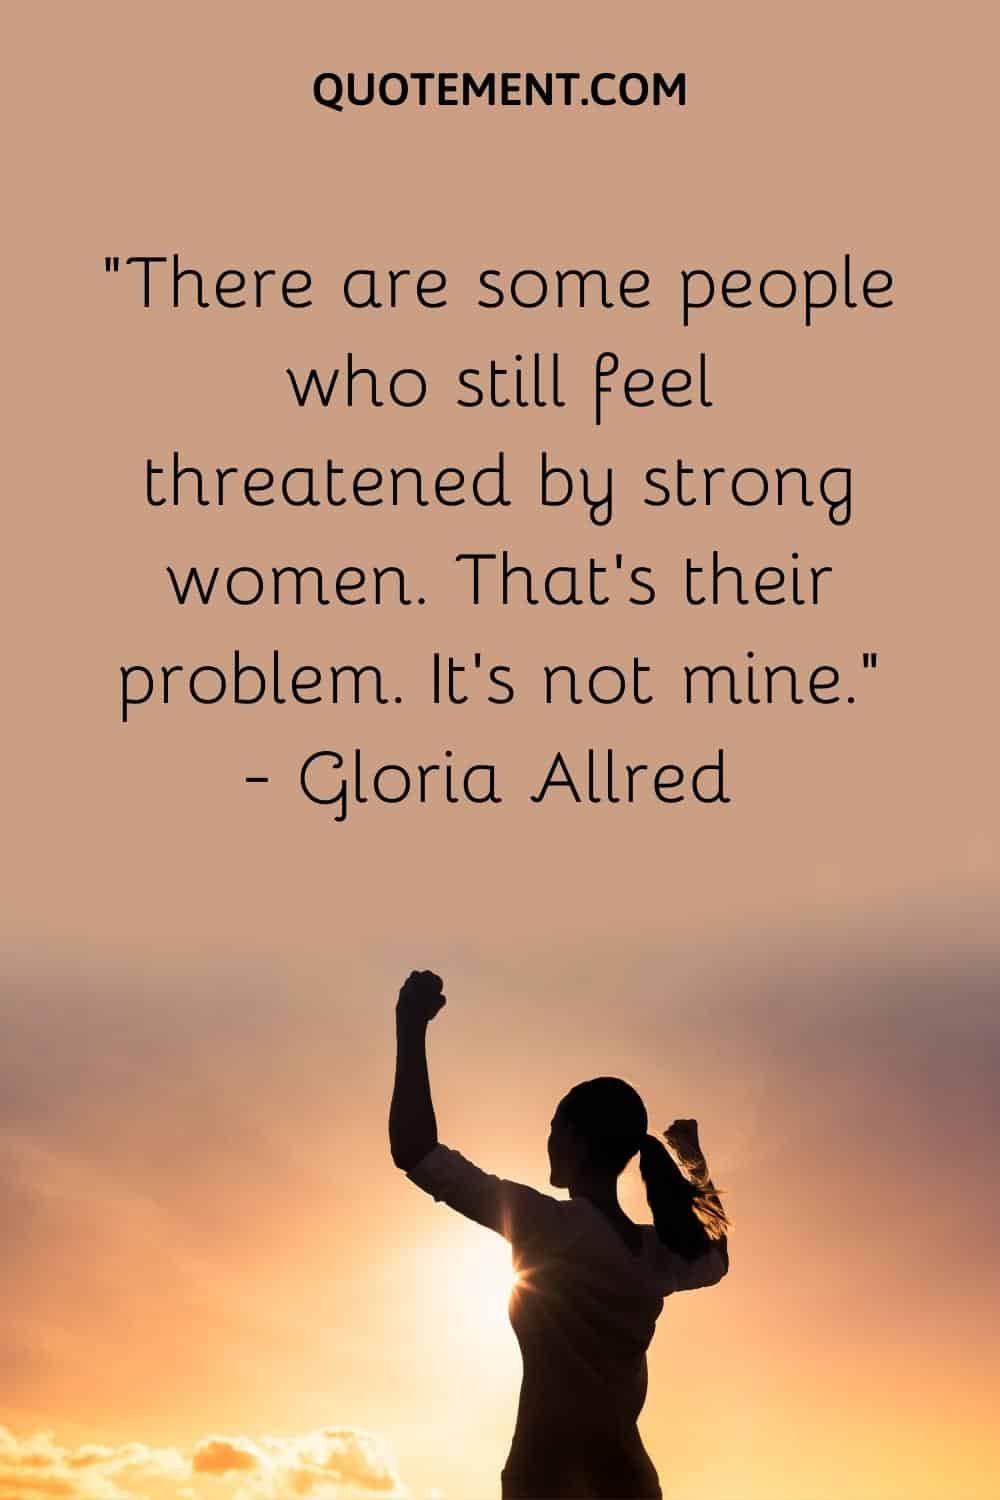 There are some people who still feel threatened by strong women